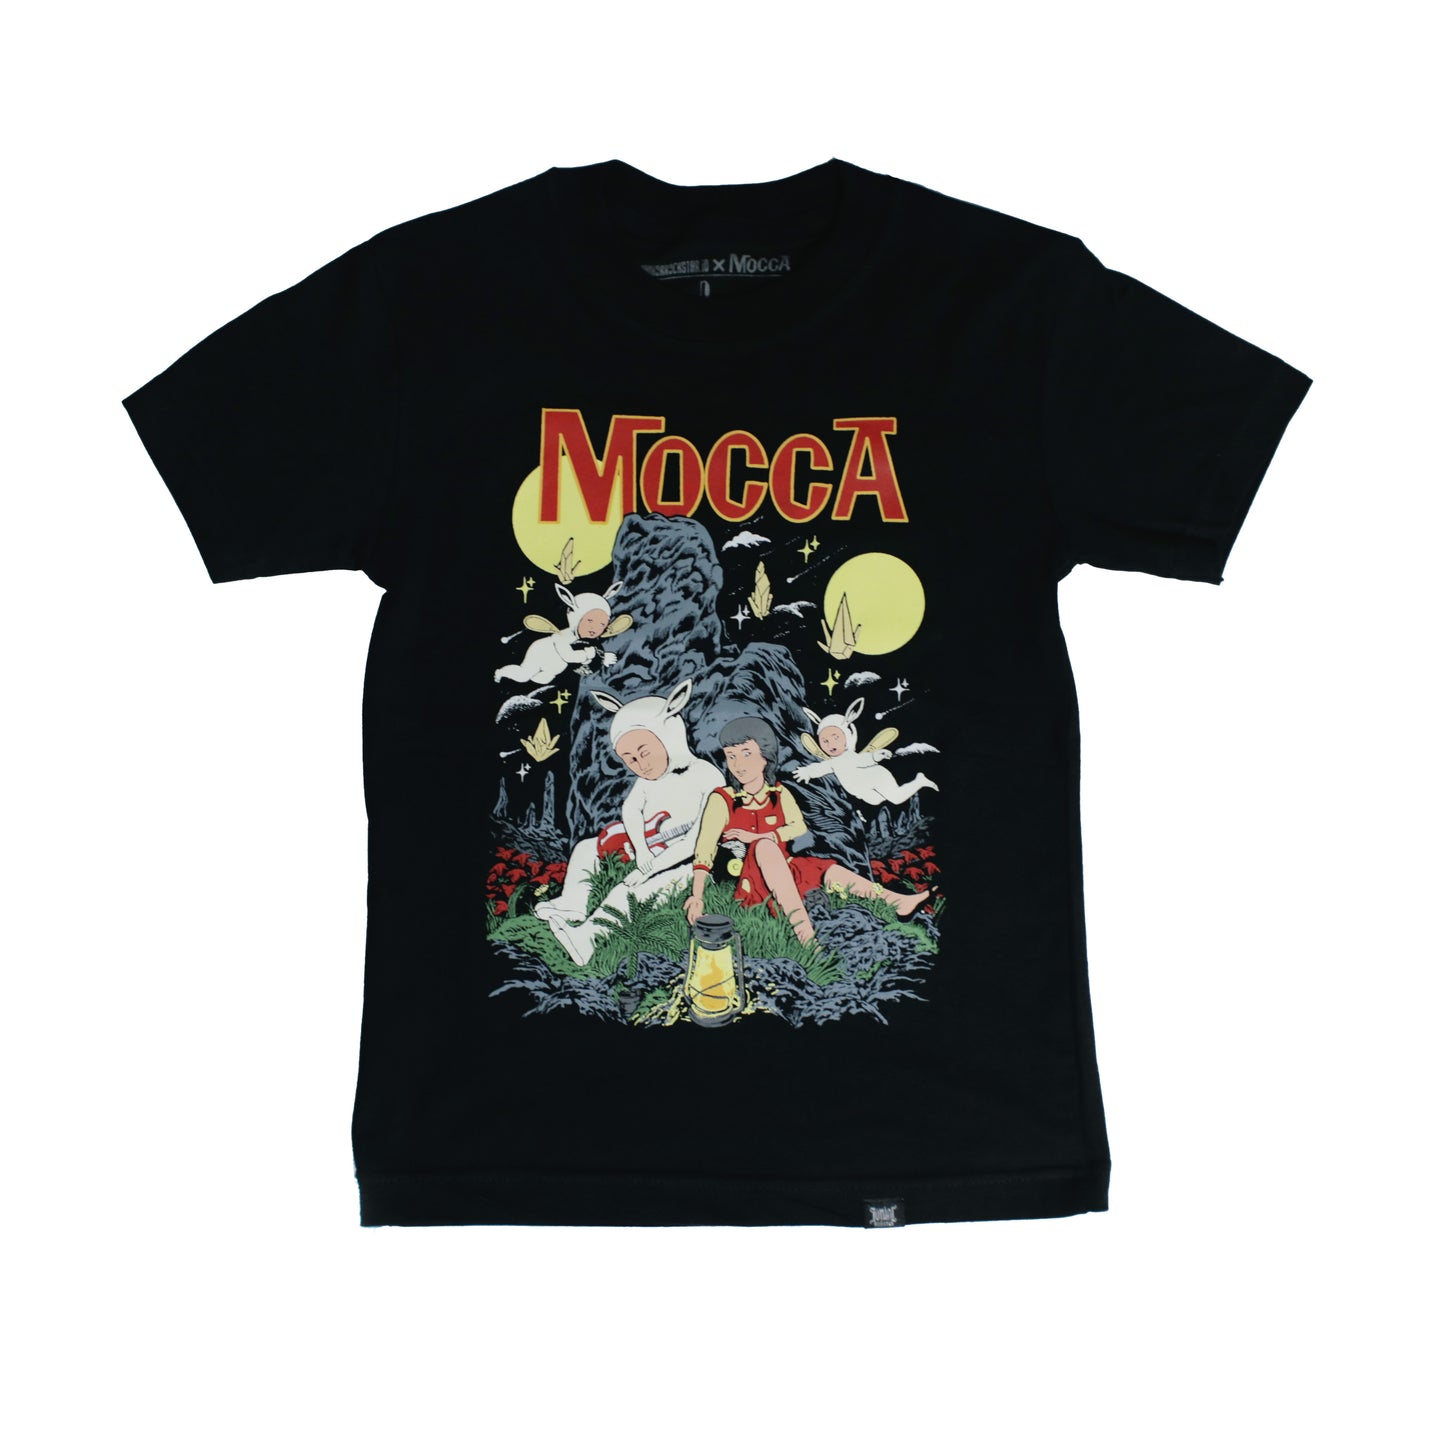 Official Merchandise Baju Anak Mocca - When The Moonlight Shines